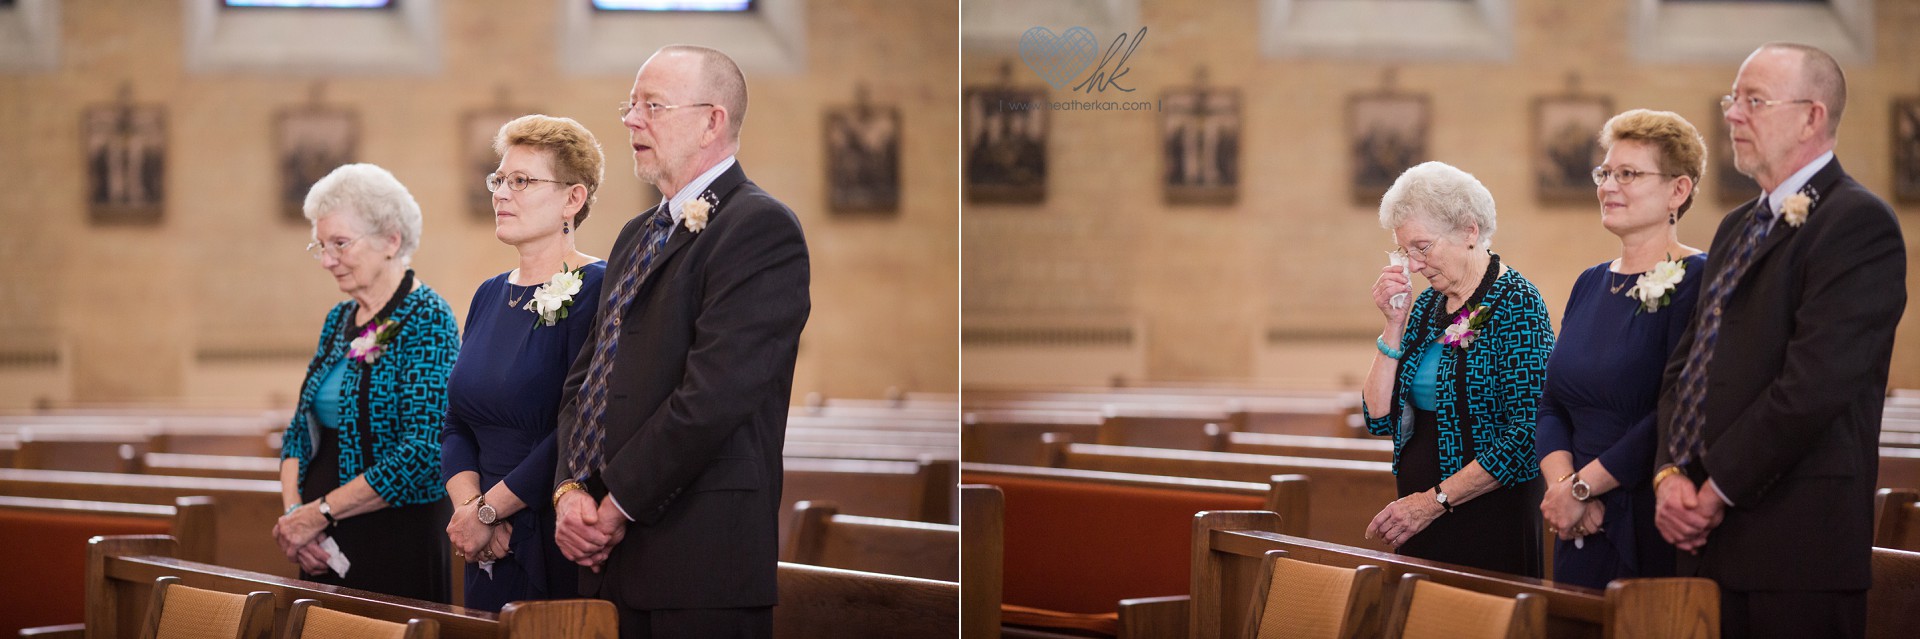 wedding photographs at Church of the Resurrection in Lansing MI- bride's entrance